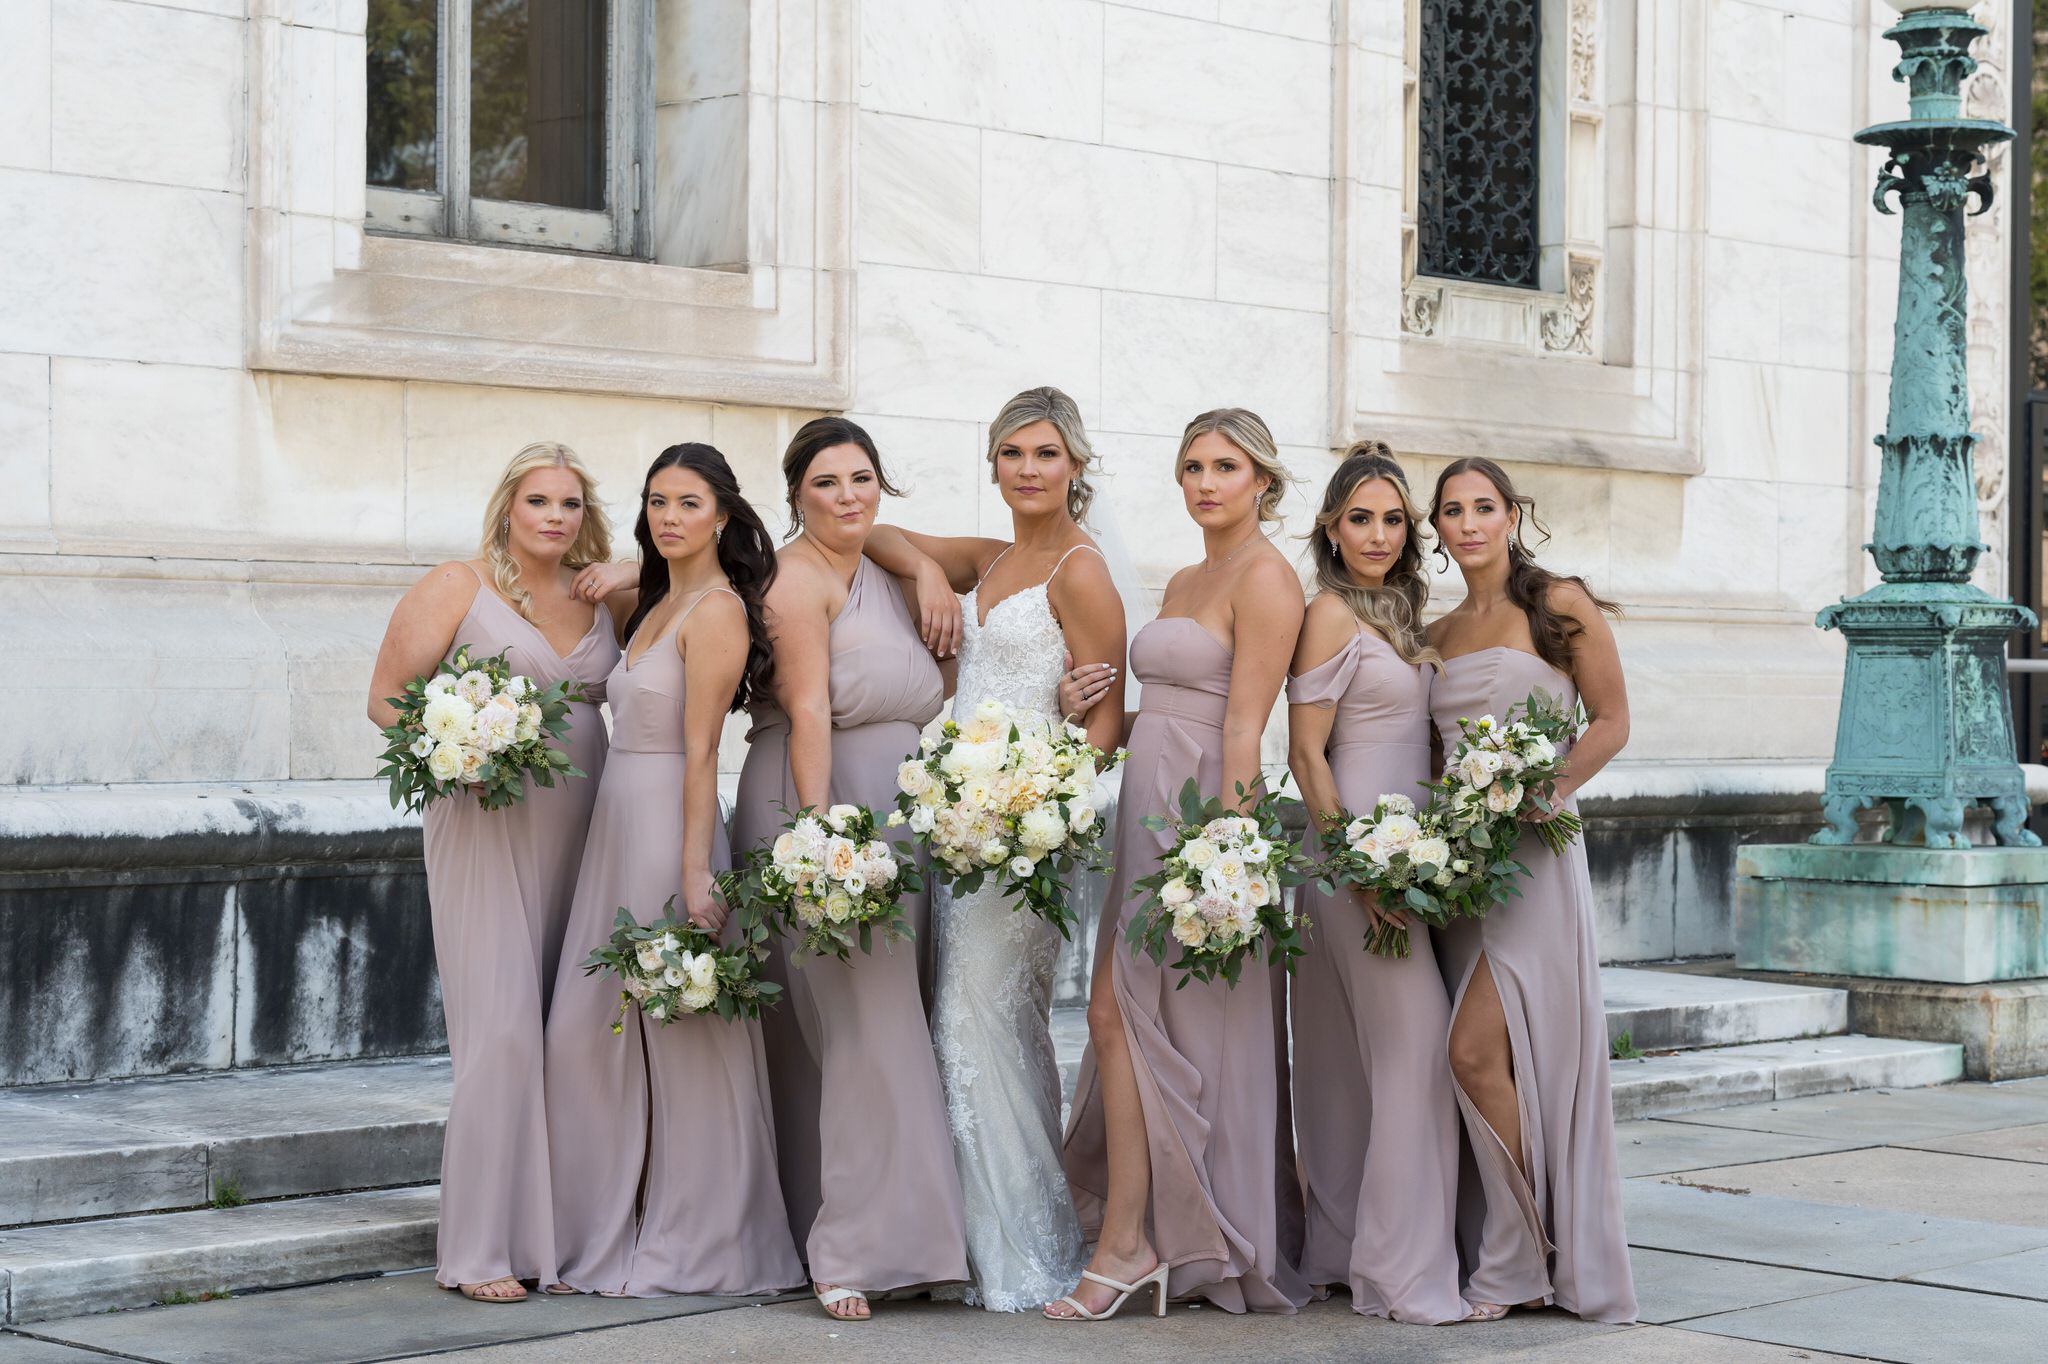 Bridesmaids poses like a Vanity Fair magazine cover during their Detroit wedding by Brian Weitzel Photography.  